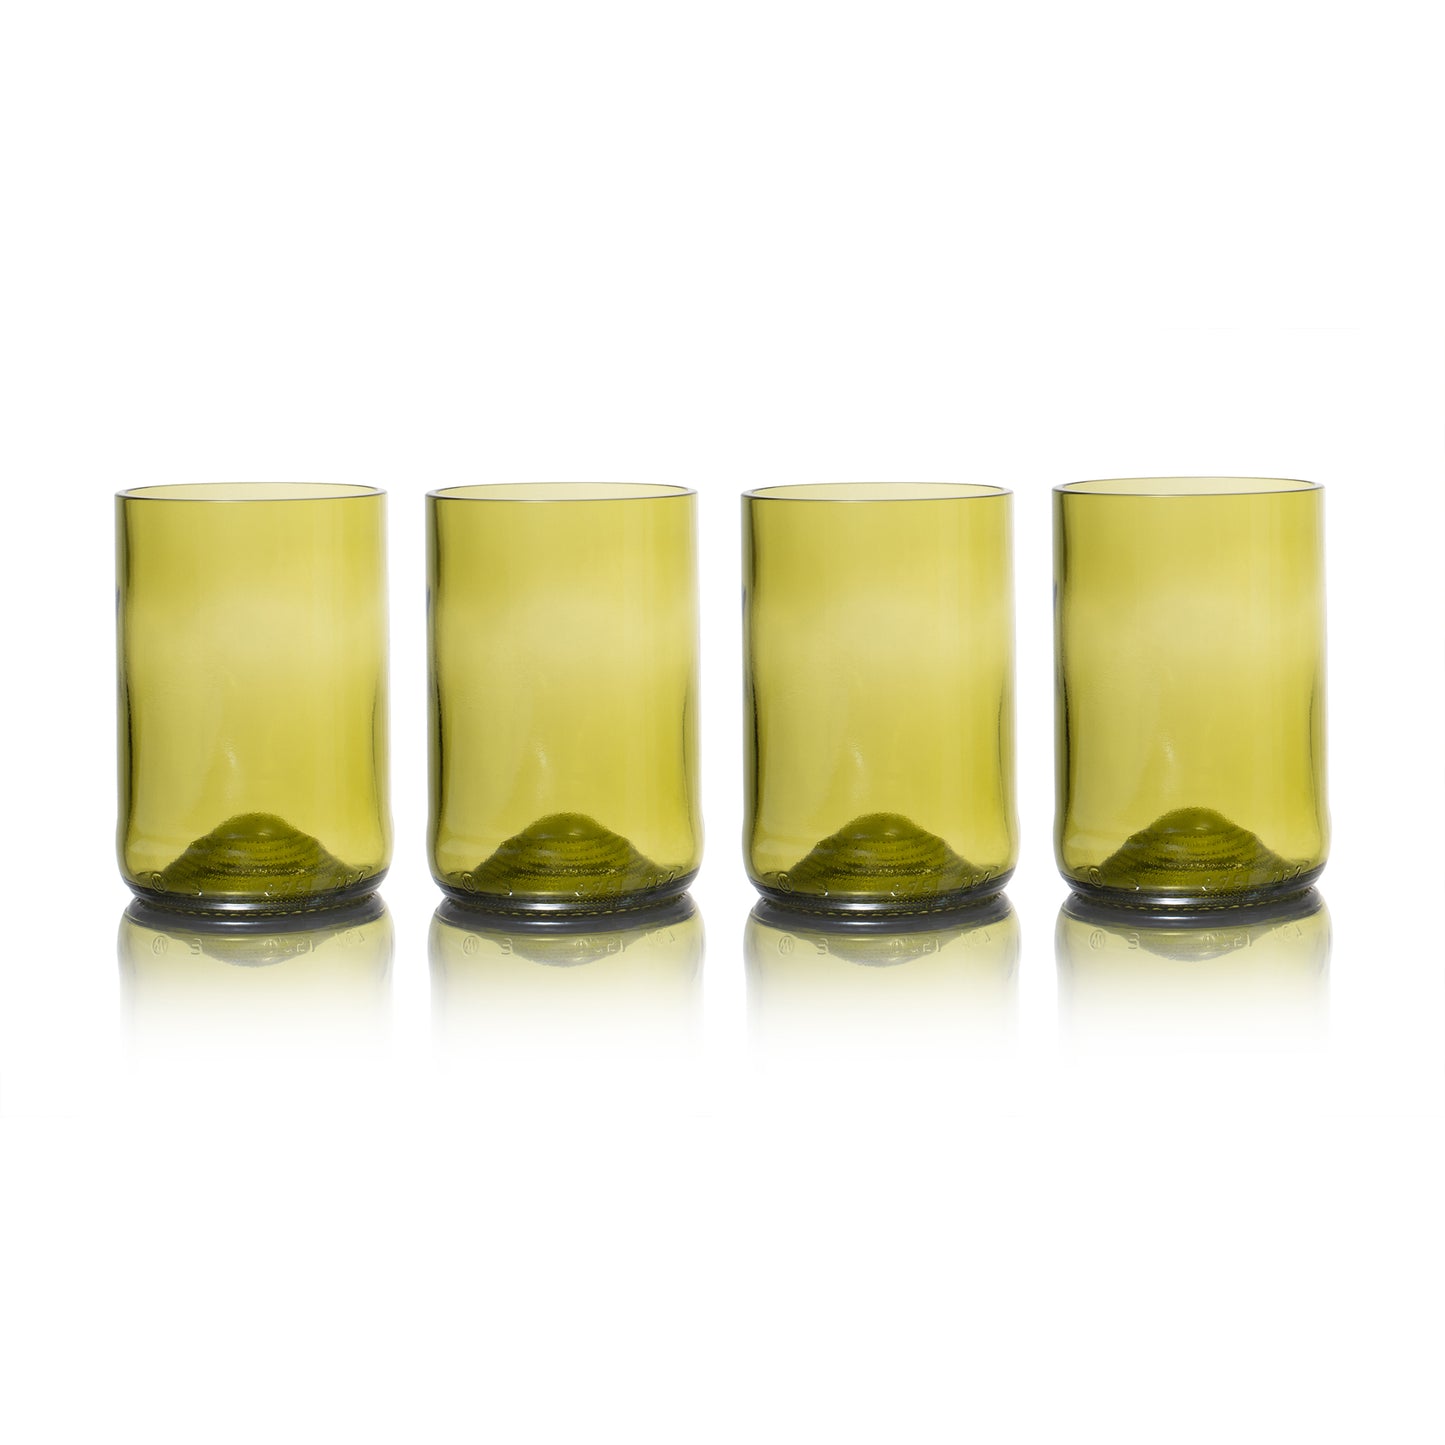 Rebottled amber colored 4-pack tumblers